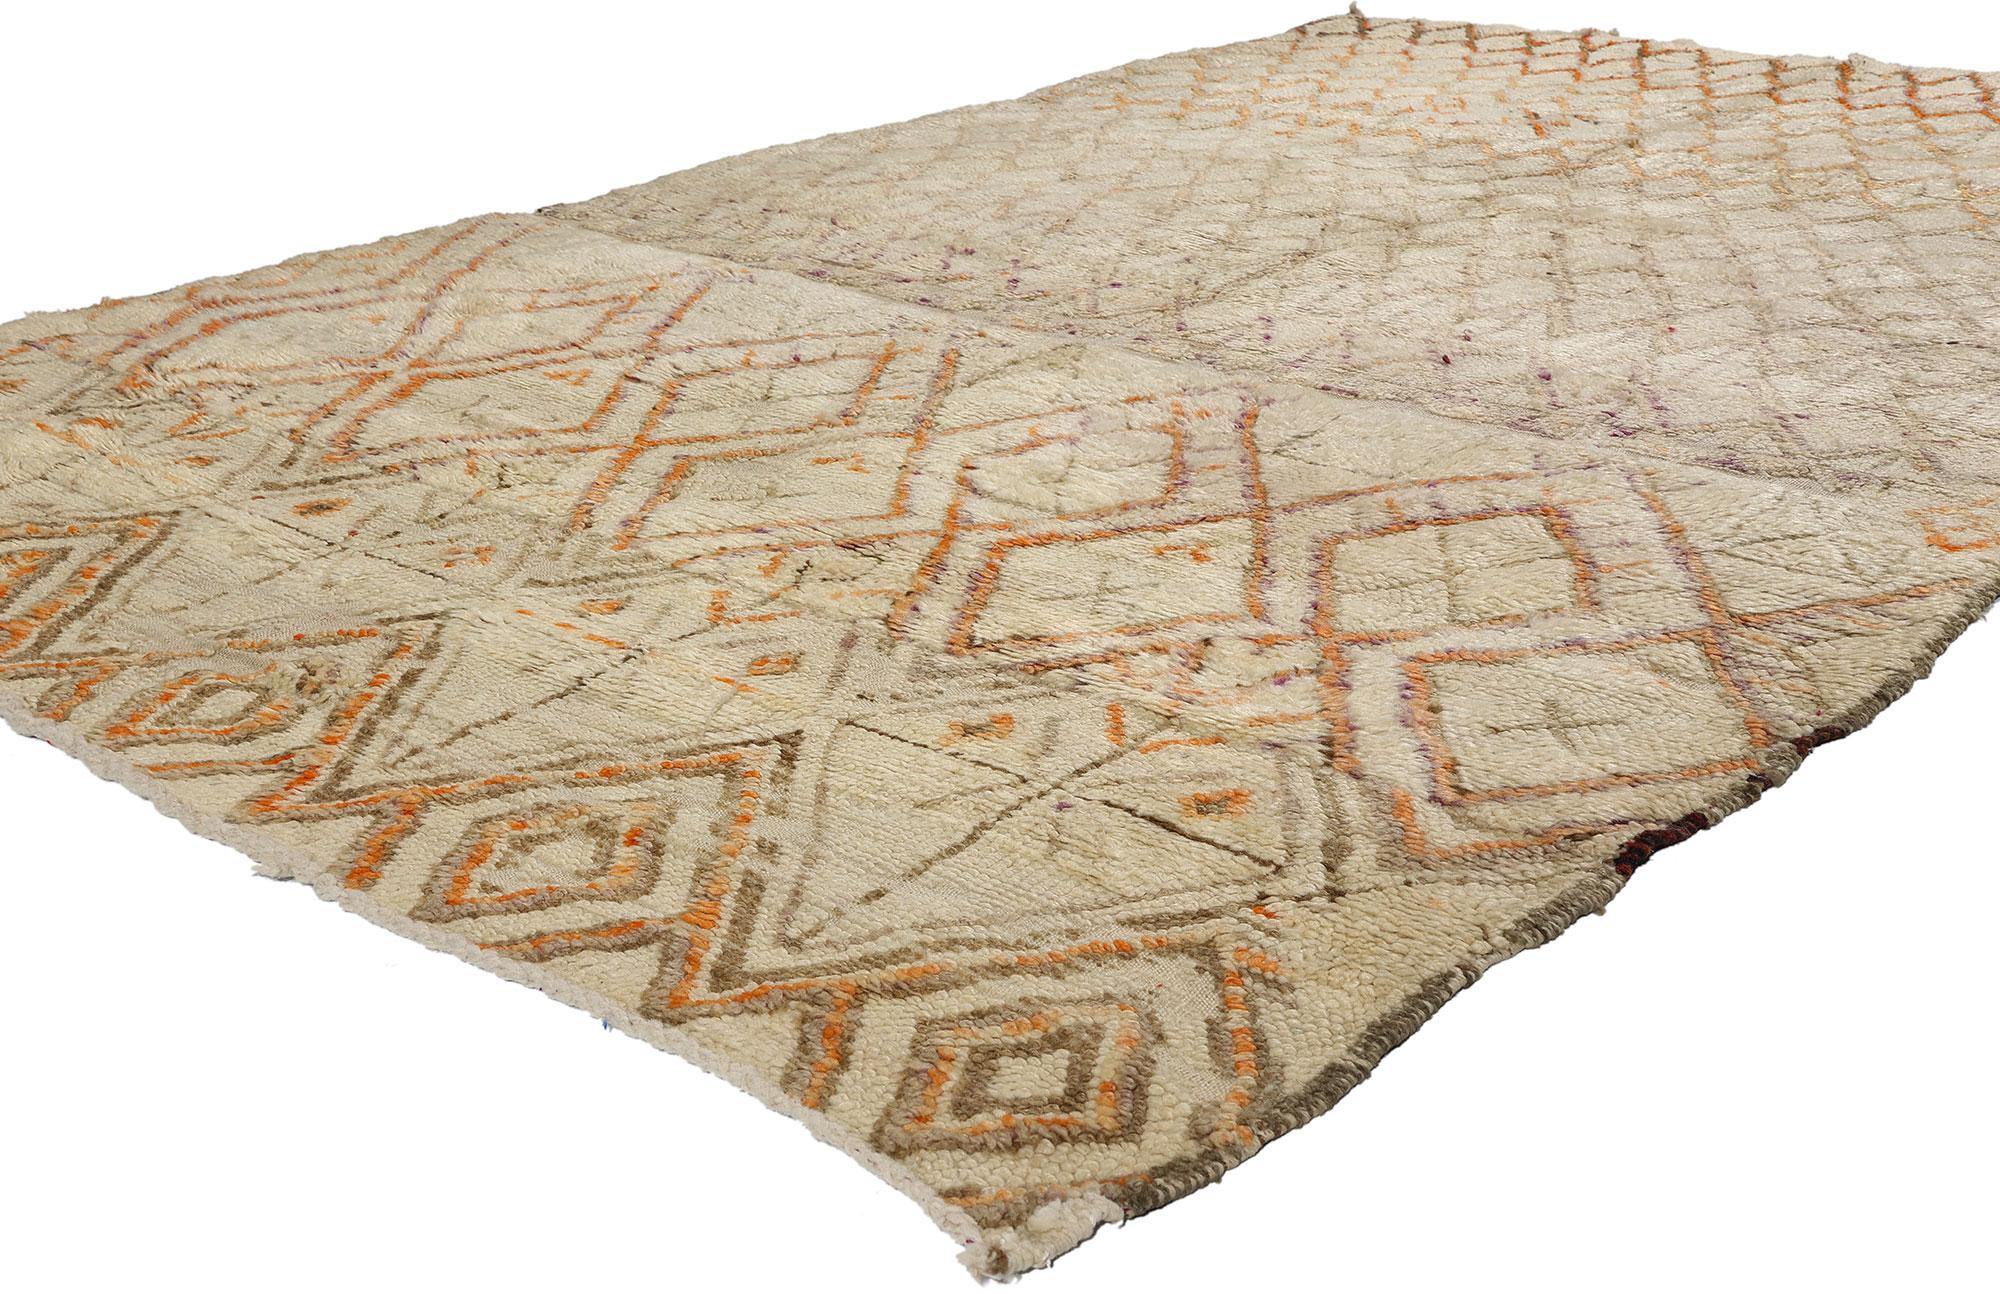 21764 Vintage Moroccan Beni Ourain Rug, 05'05 x 08'11. Hailing from the esteemed Beni Ourain tribe in Morocco, these finely crafted rugs pay homage to tradition with meticulous attention to detail. They employ untreated sheep's wool to imbue spaces